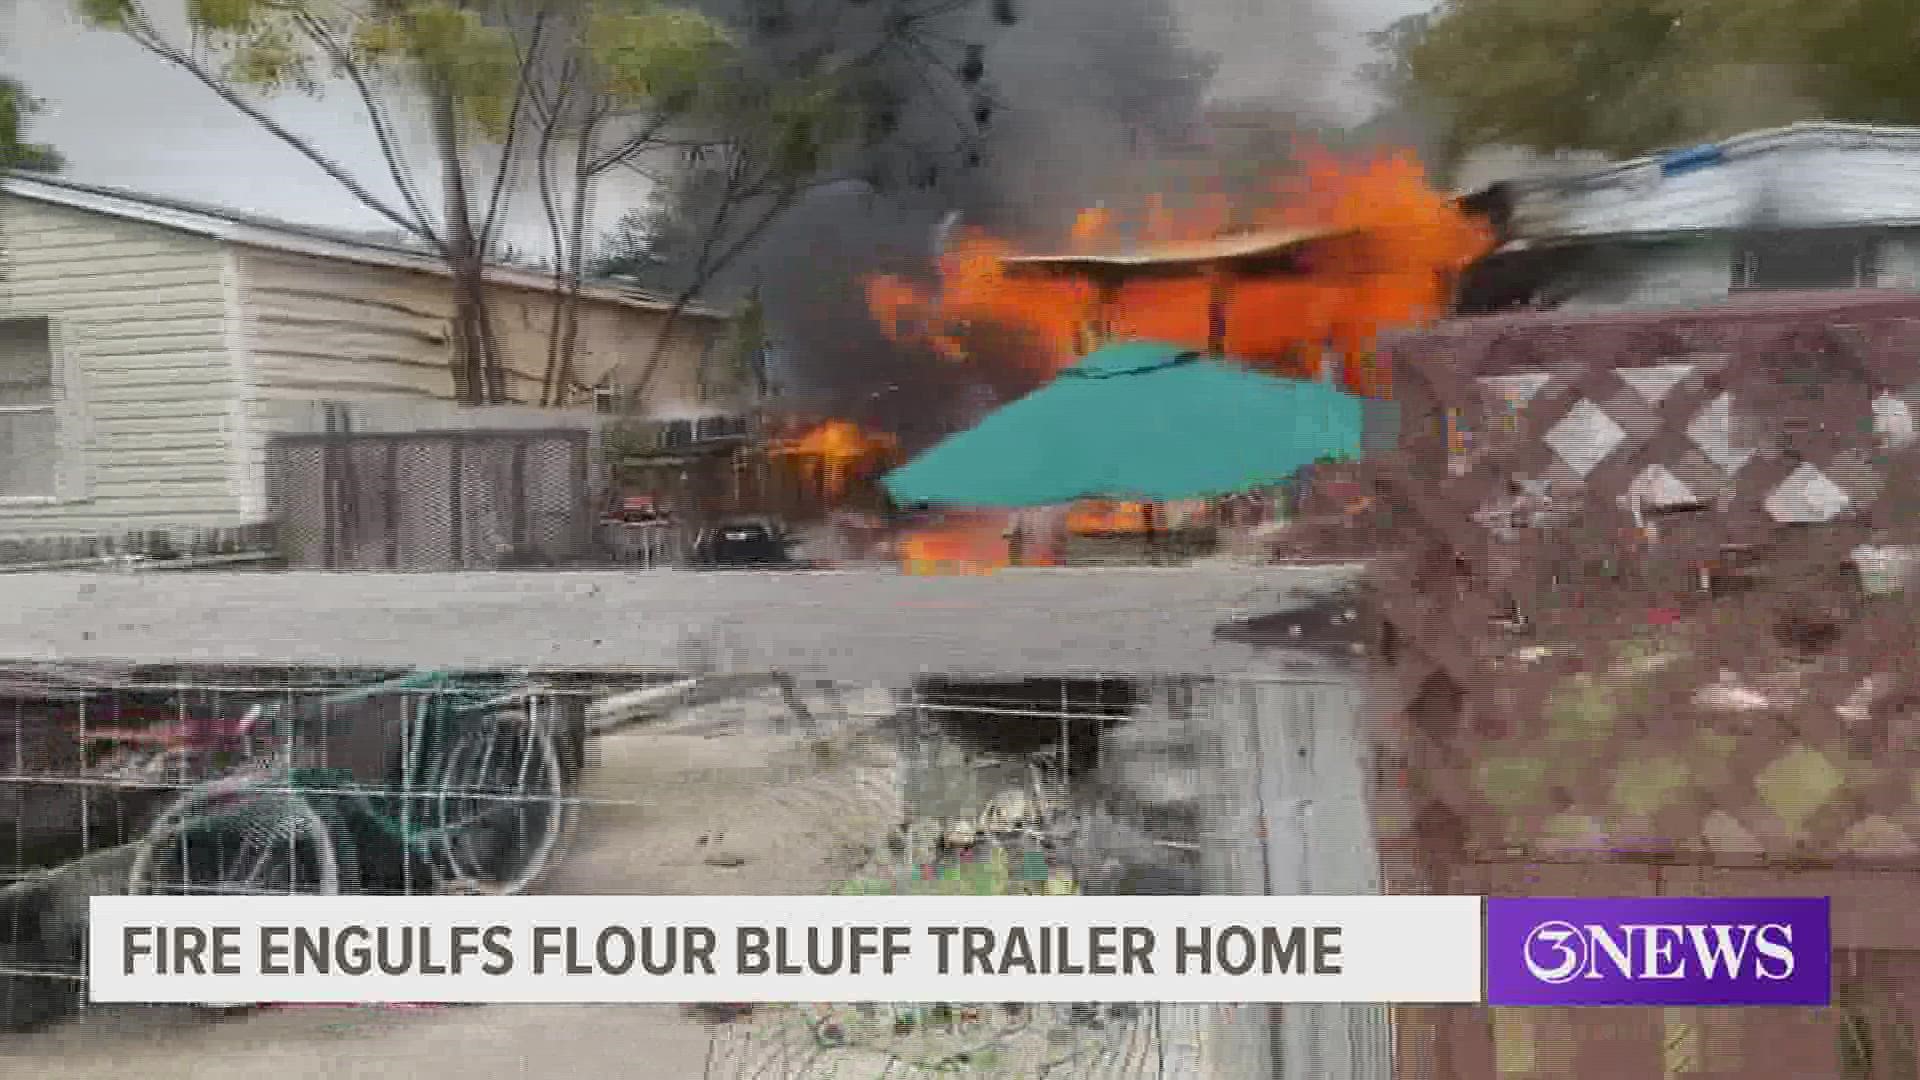 Flames could be seen coming from the front of a trailer home on the 2900 block of Islander Dr. just after 10:30 a.m.